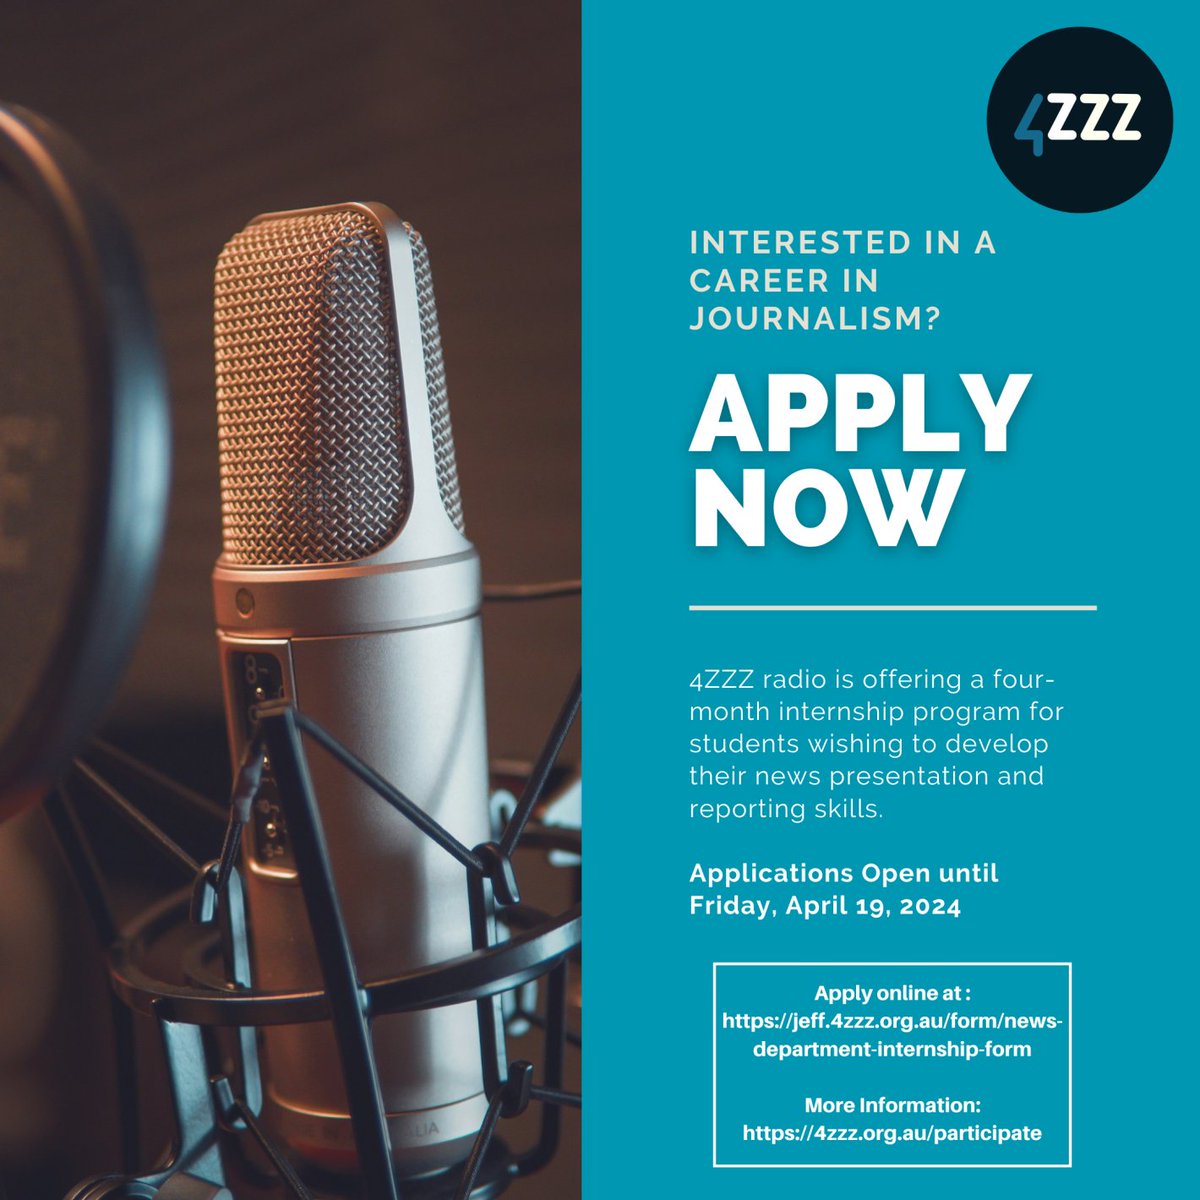 Are you interested in a career in media, journalism, or radio? Applications for the March to June internship are open NOW until Friday, April 19, 2024 - Click here to apply --> jeff.4zzz.org.au/webform/news_d…